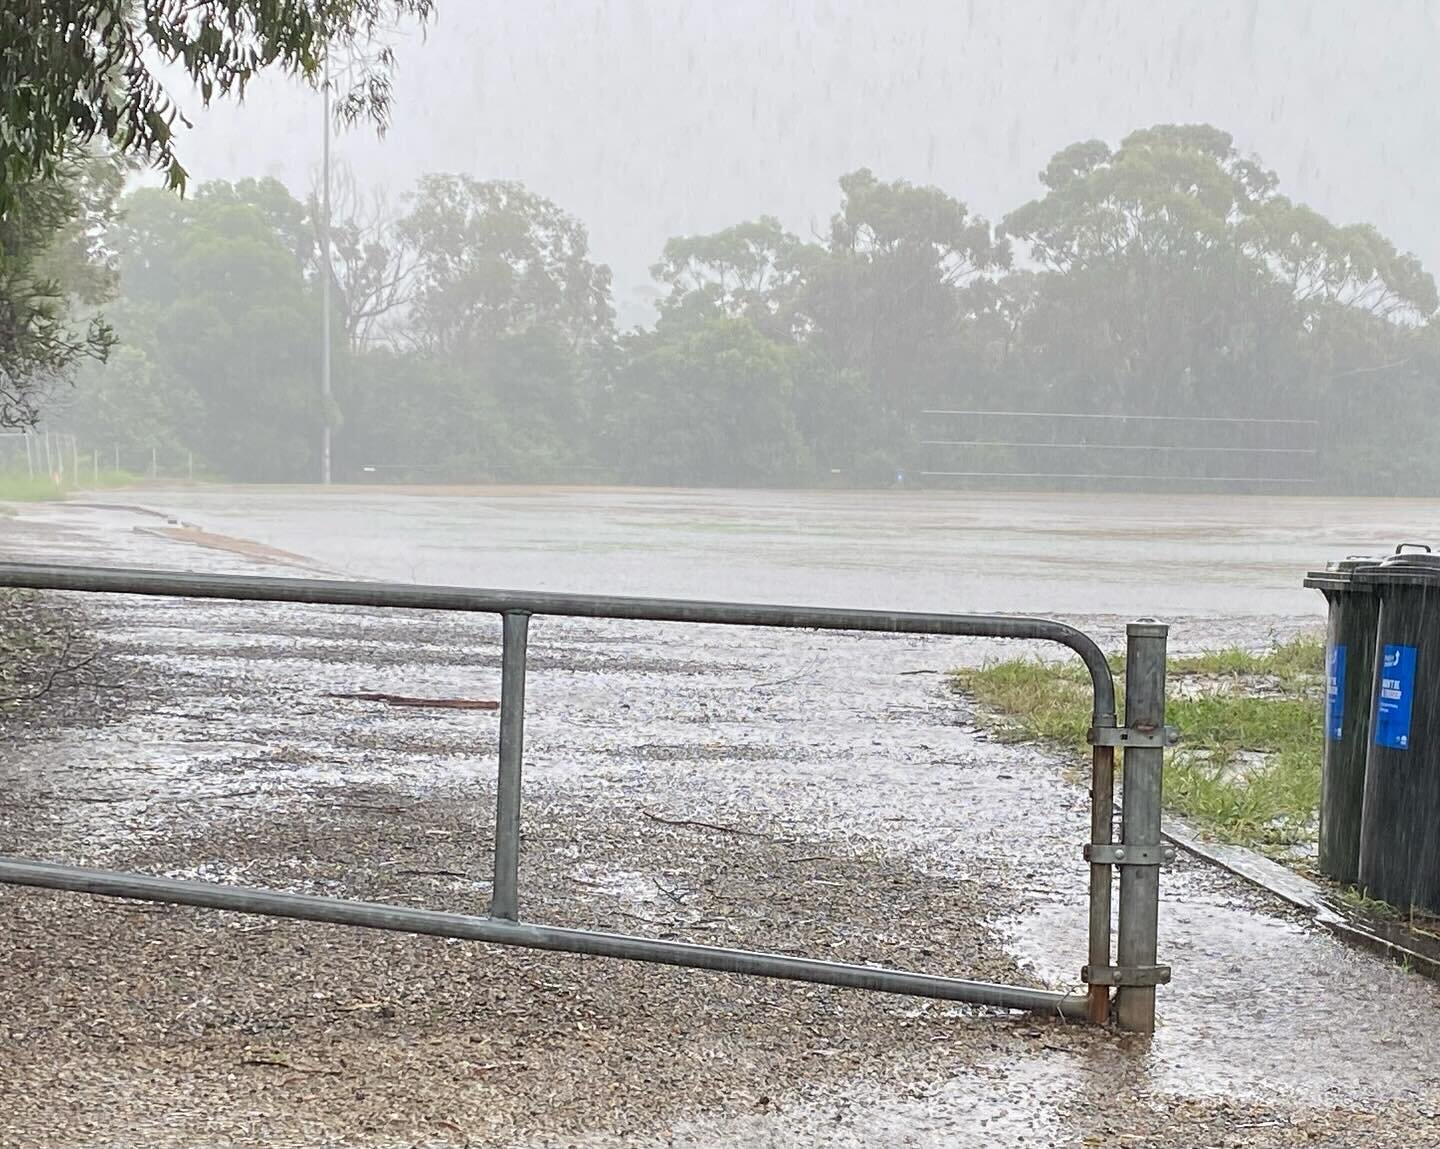 ☔️FRIDAY FLASHBACK - SAMUEL KING OVAL 🌧️

A look back to the last time we experienced a significant wet weather event at the home of Magpies Football during what was a &lsquo;monsoonal&rsquo; 2022 winter season.

Our treasured home ground handles th